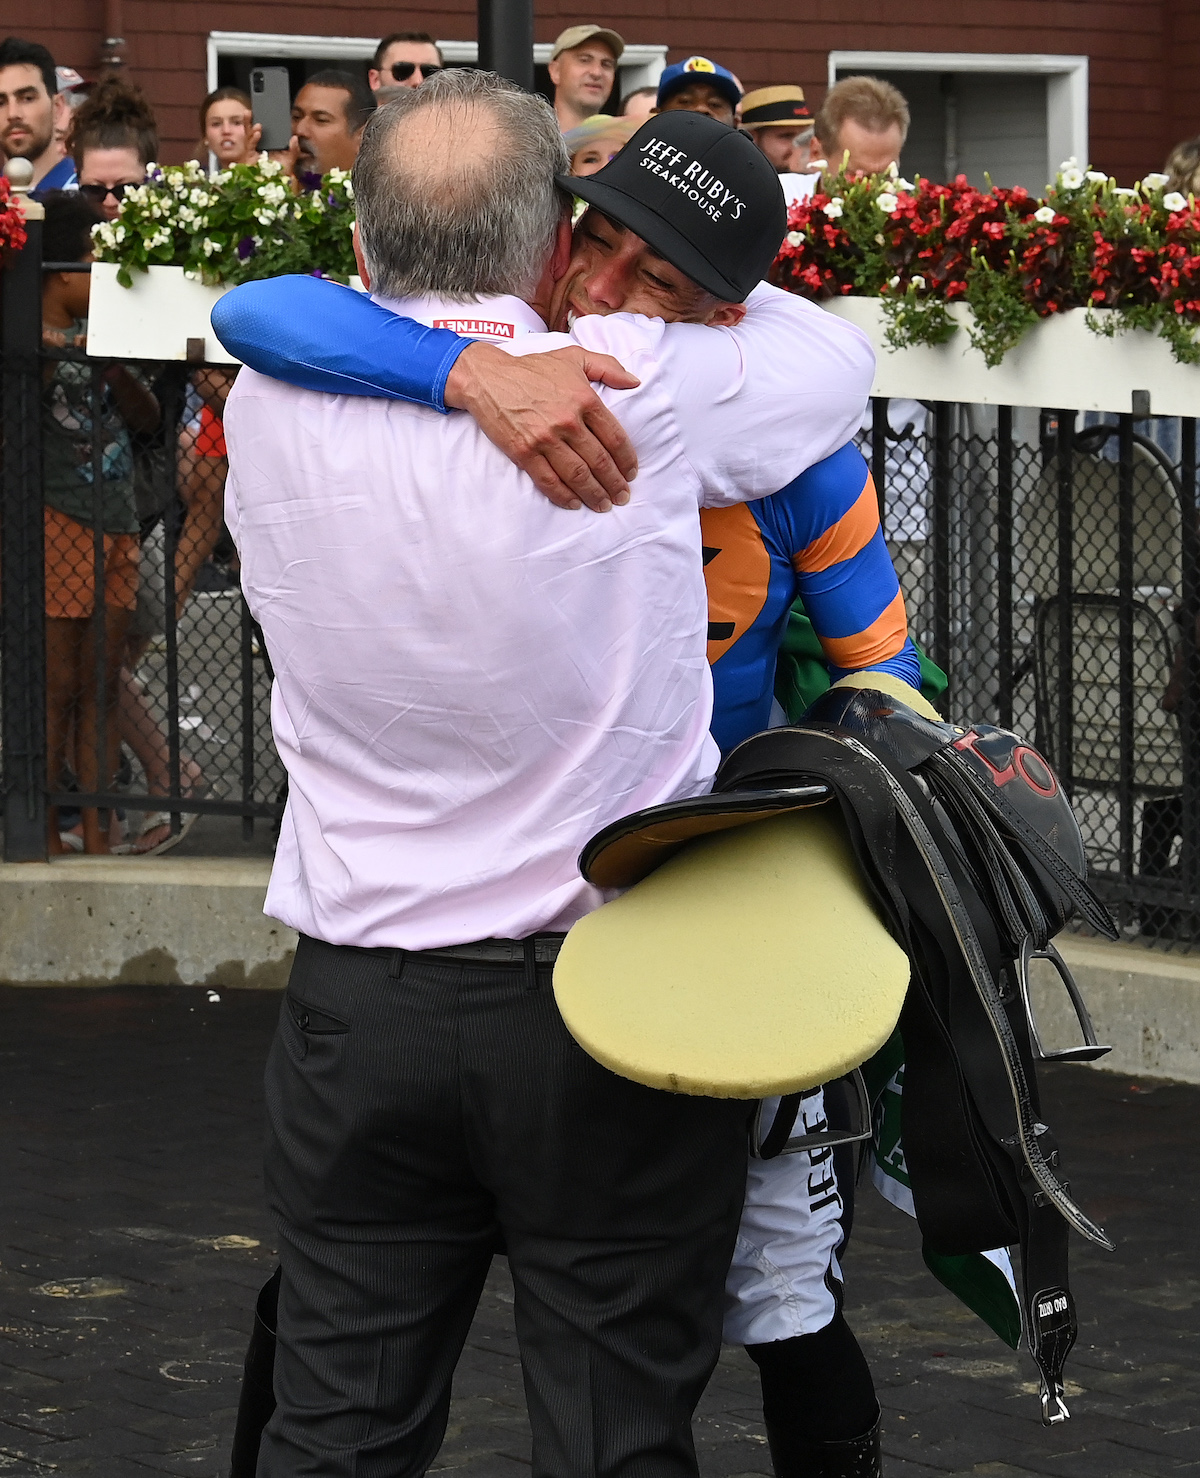 Back in the big time: Rick Dutrow embraces jockey Irad Ortiz after White Abarrio’s Whitney victory. Photo: NYRA/Susie Raisher